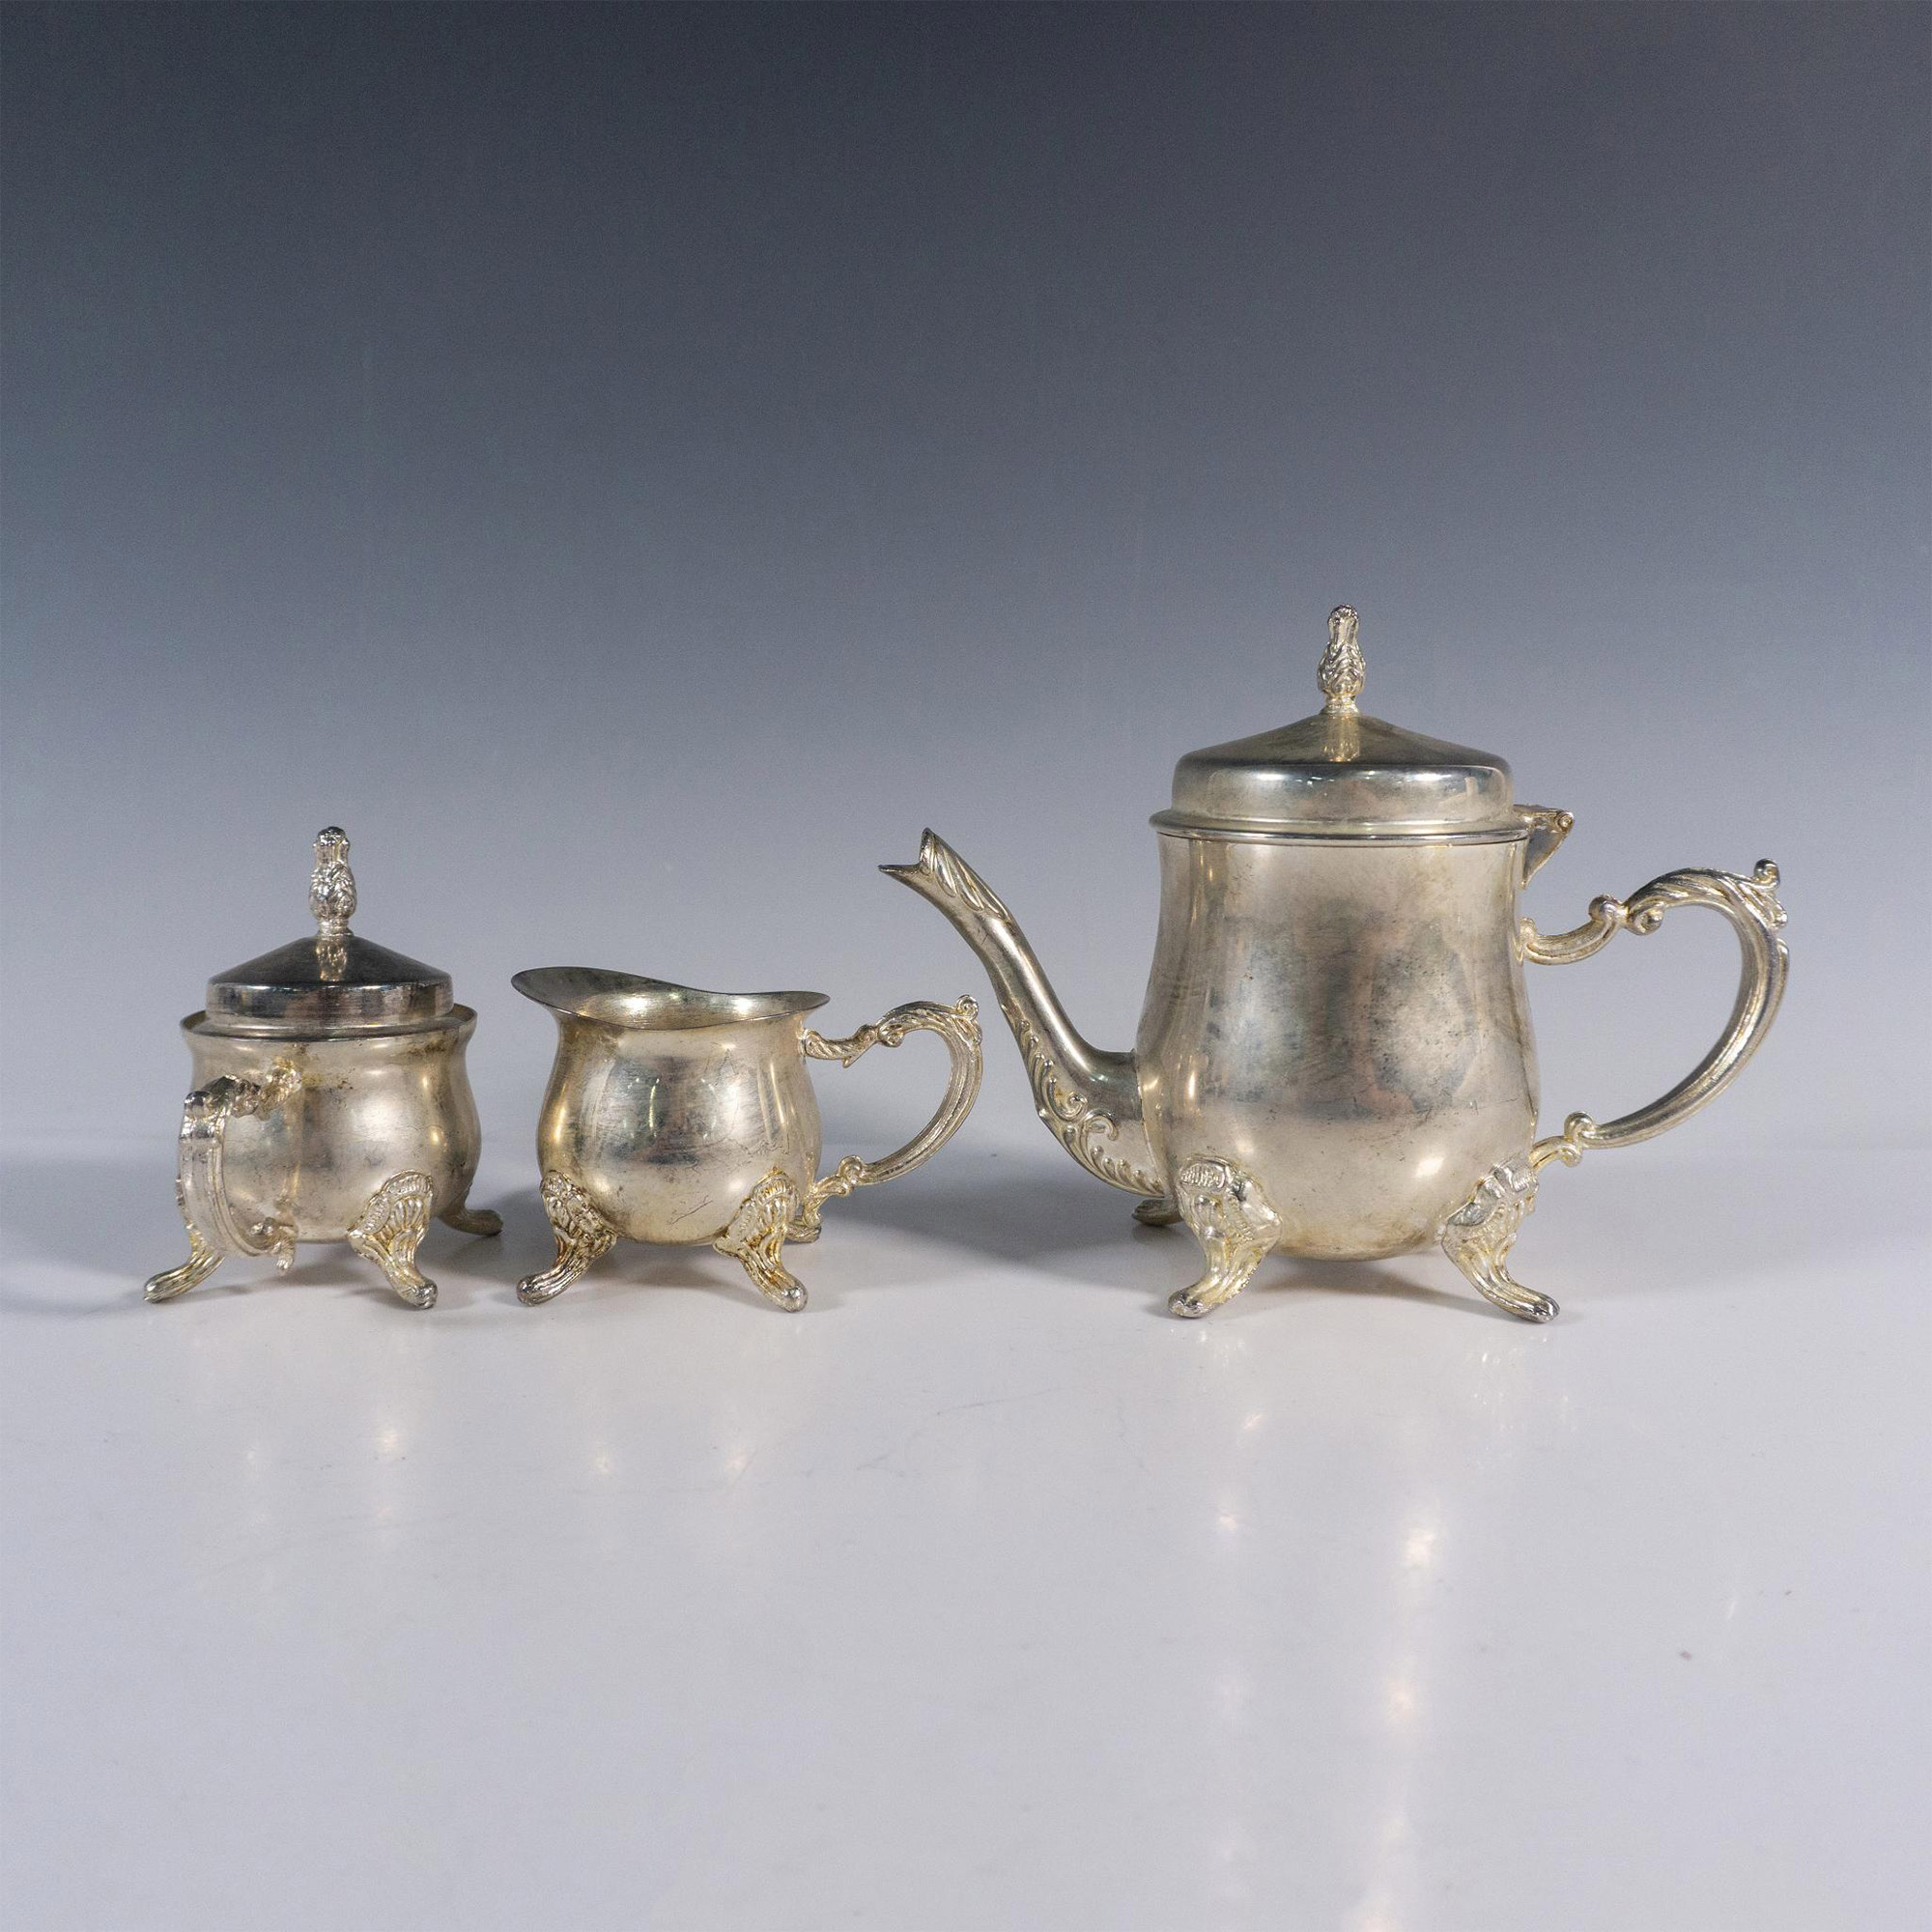 3pc Mini Footed Silver Plated Teapot, Creamer & Sugar Bowl - Image 2 of 3